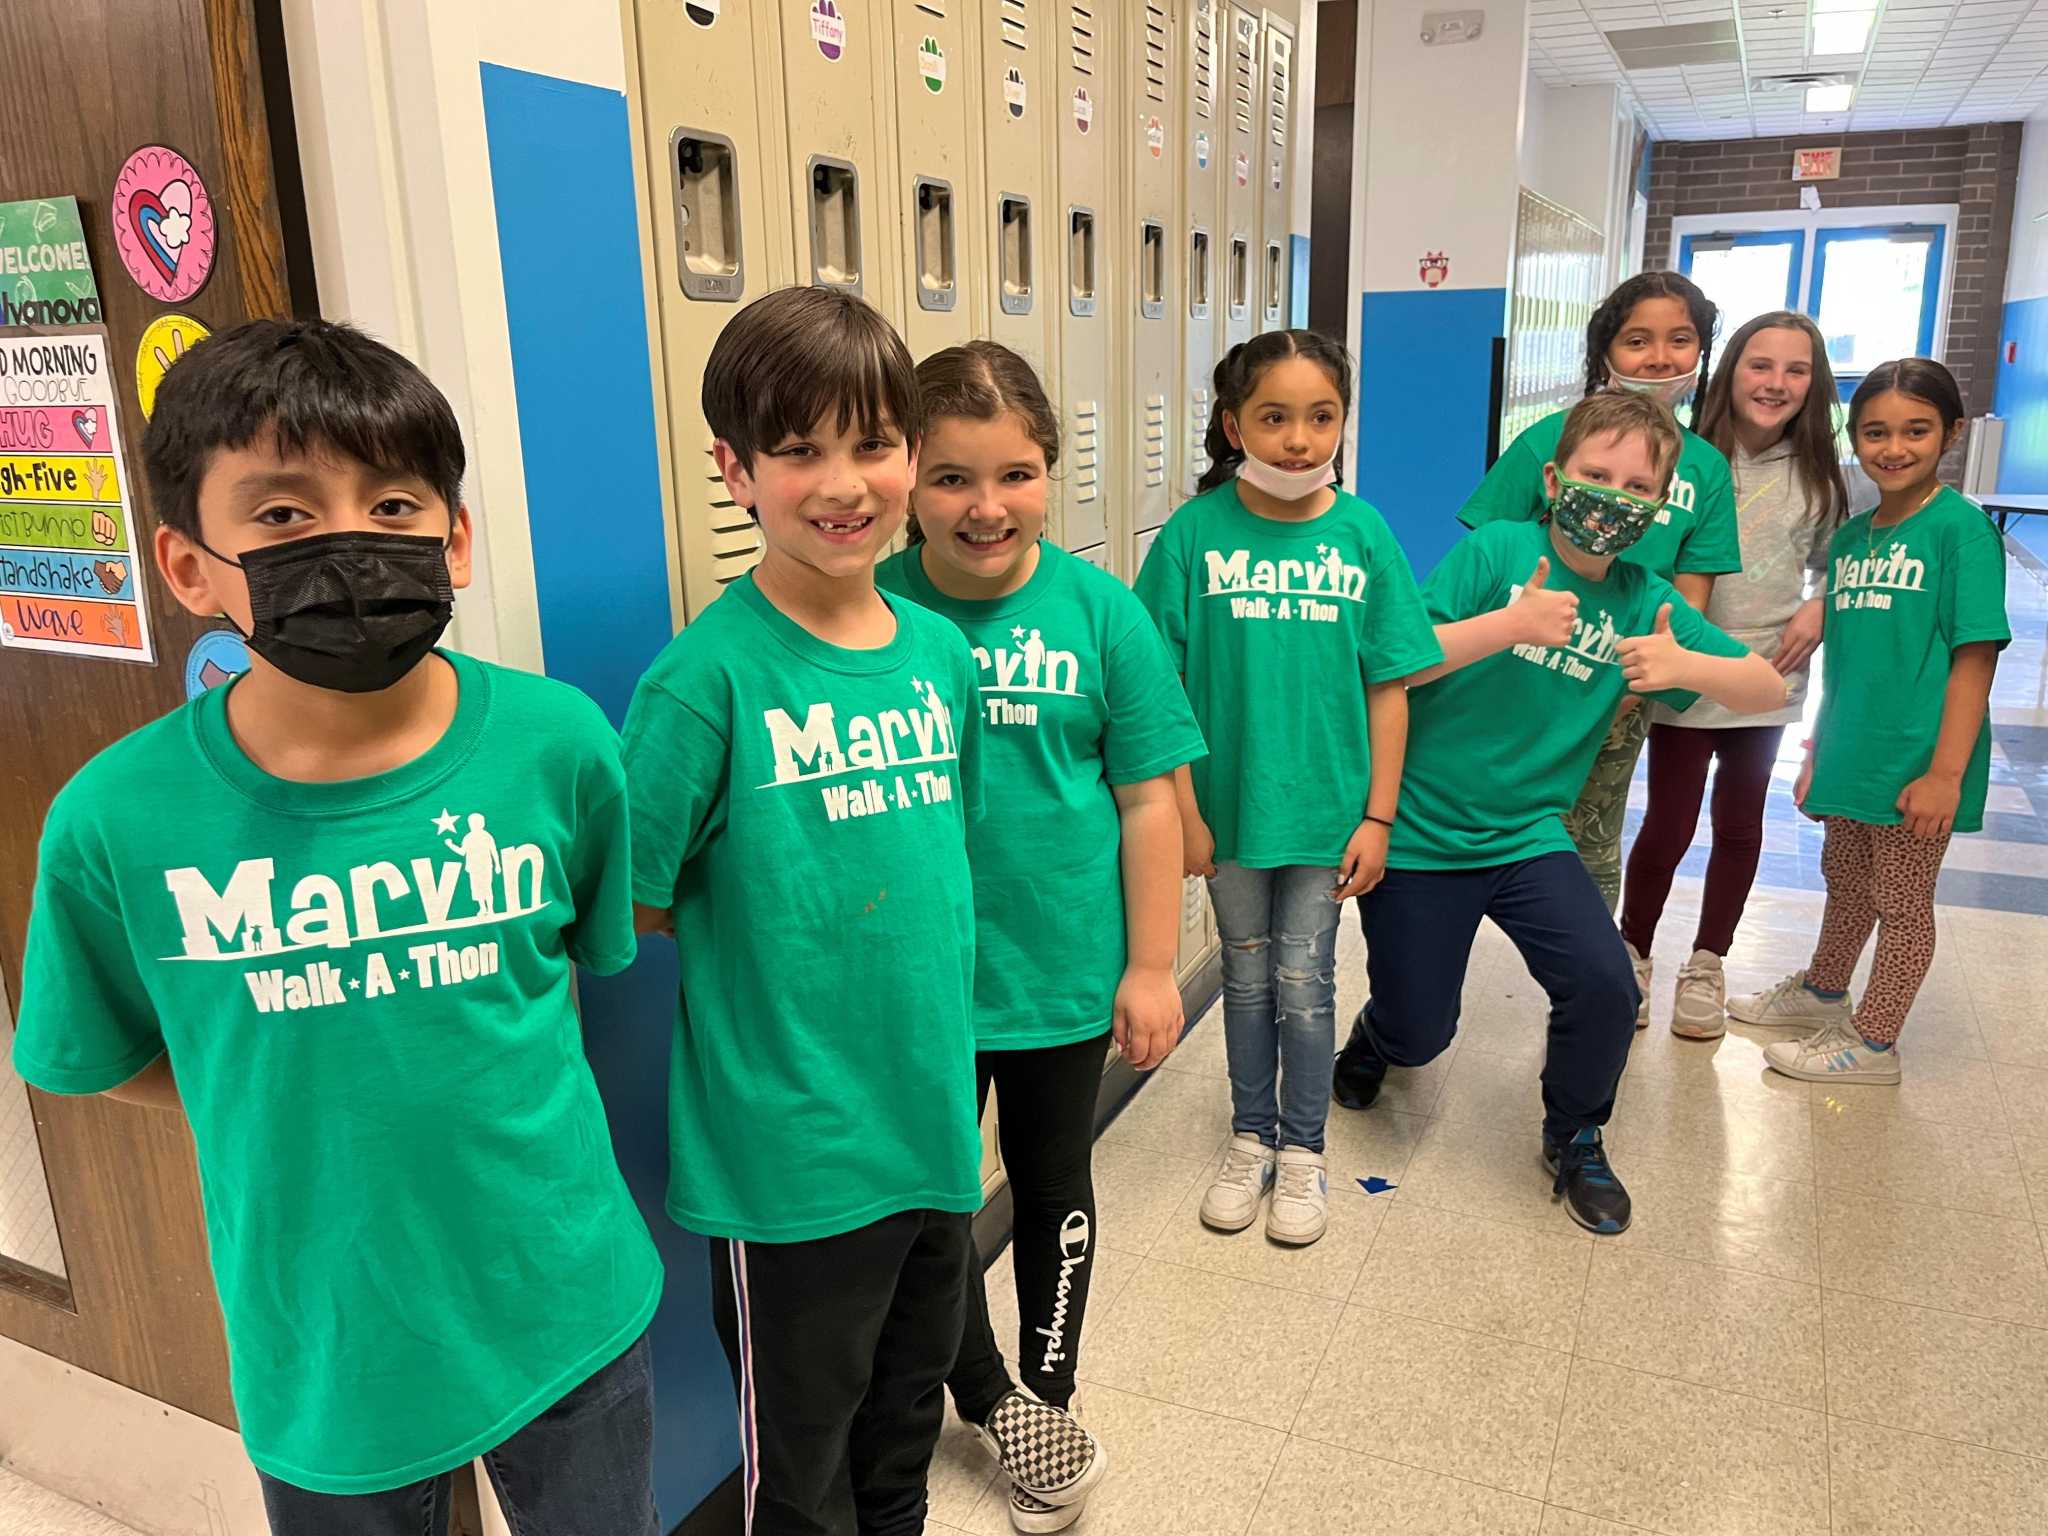 After COVID hiatus, community events return for Norwalk’s Marvin Elementary